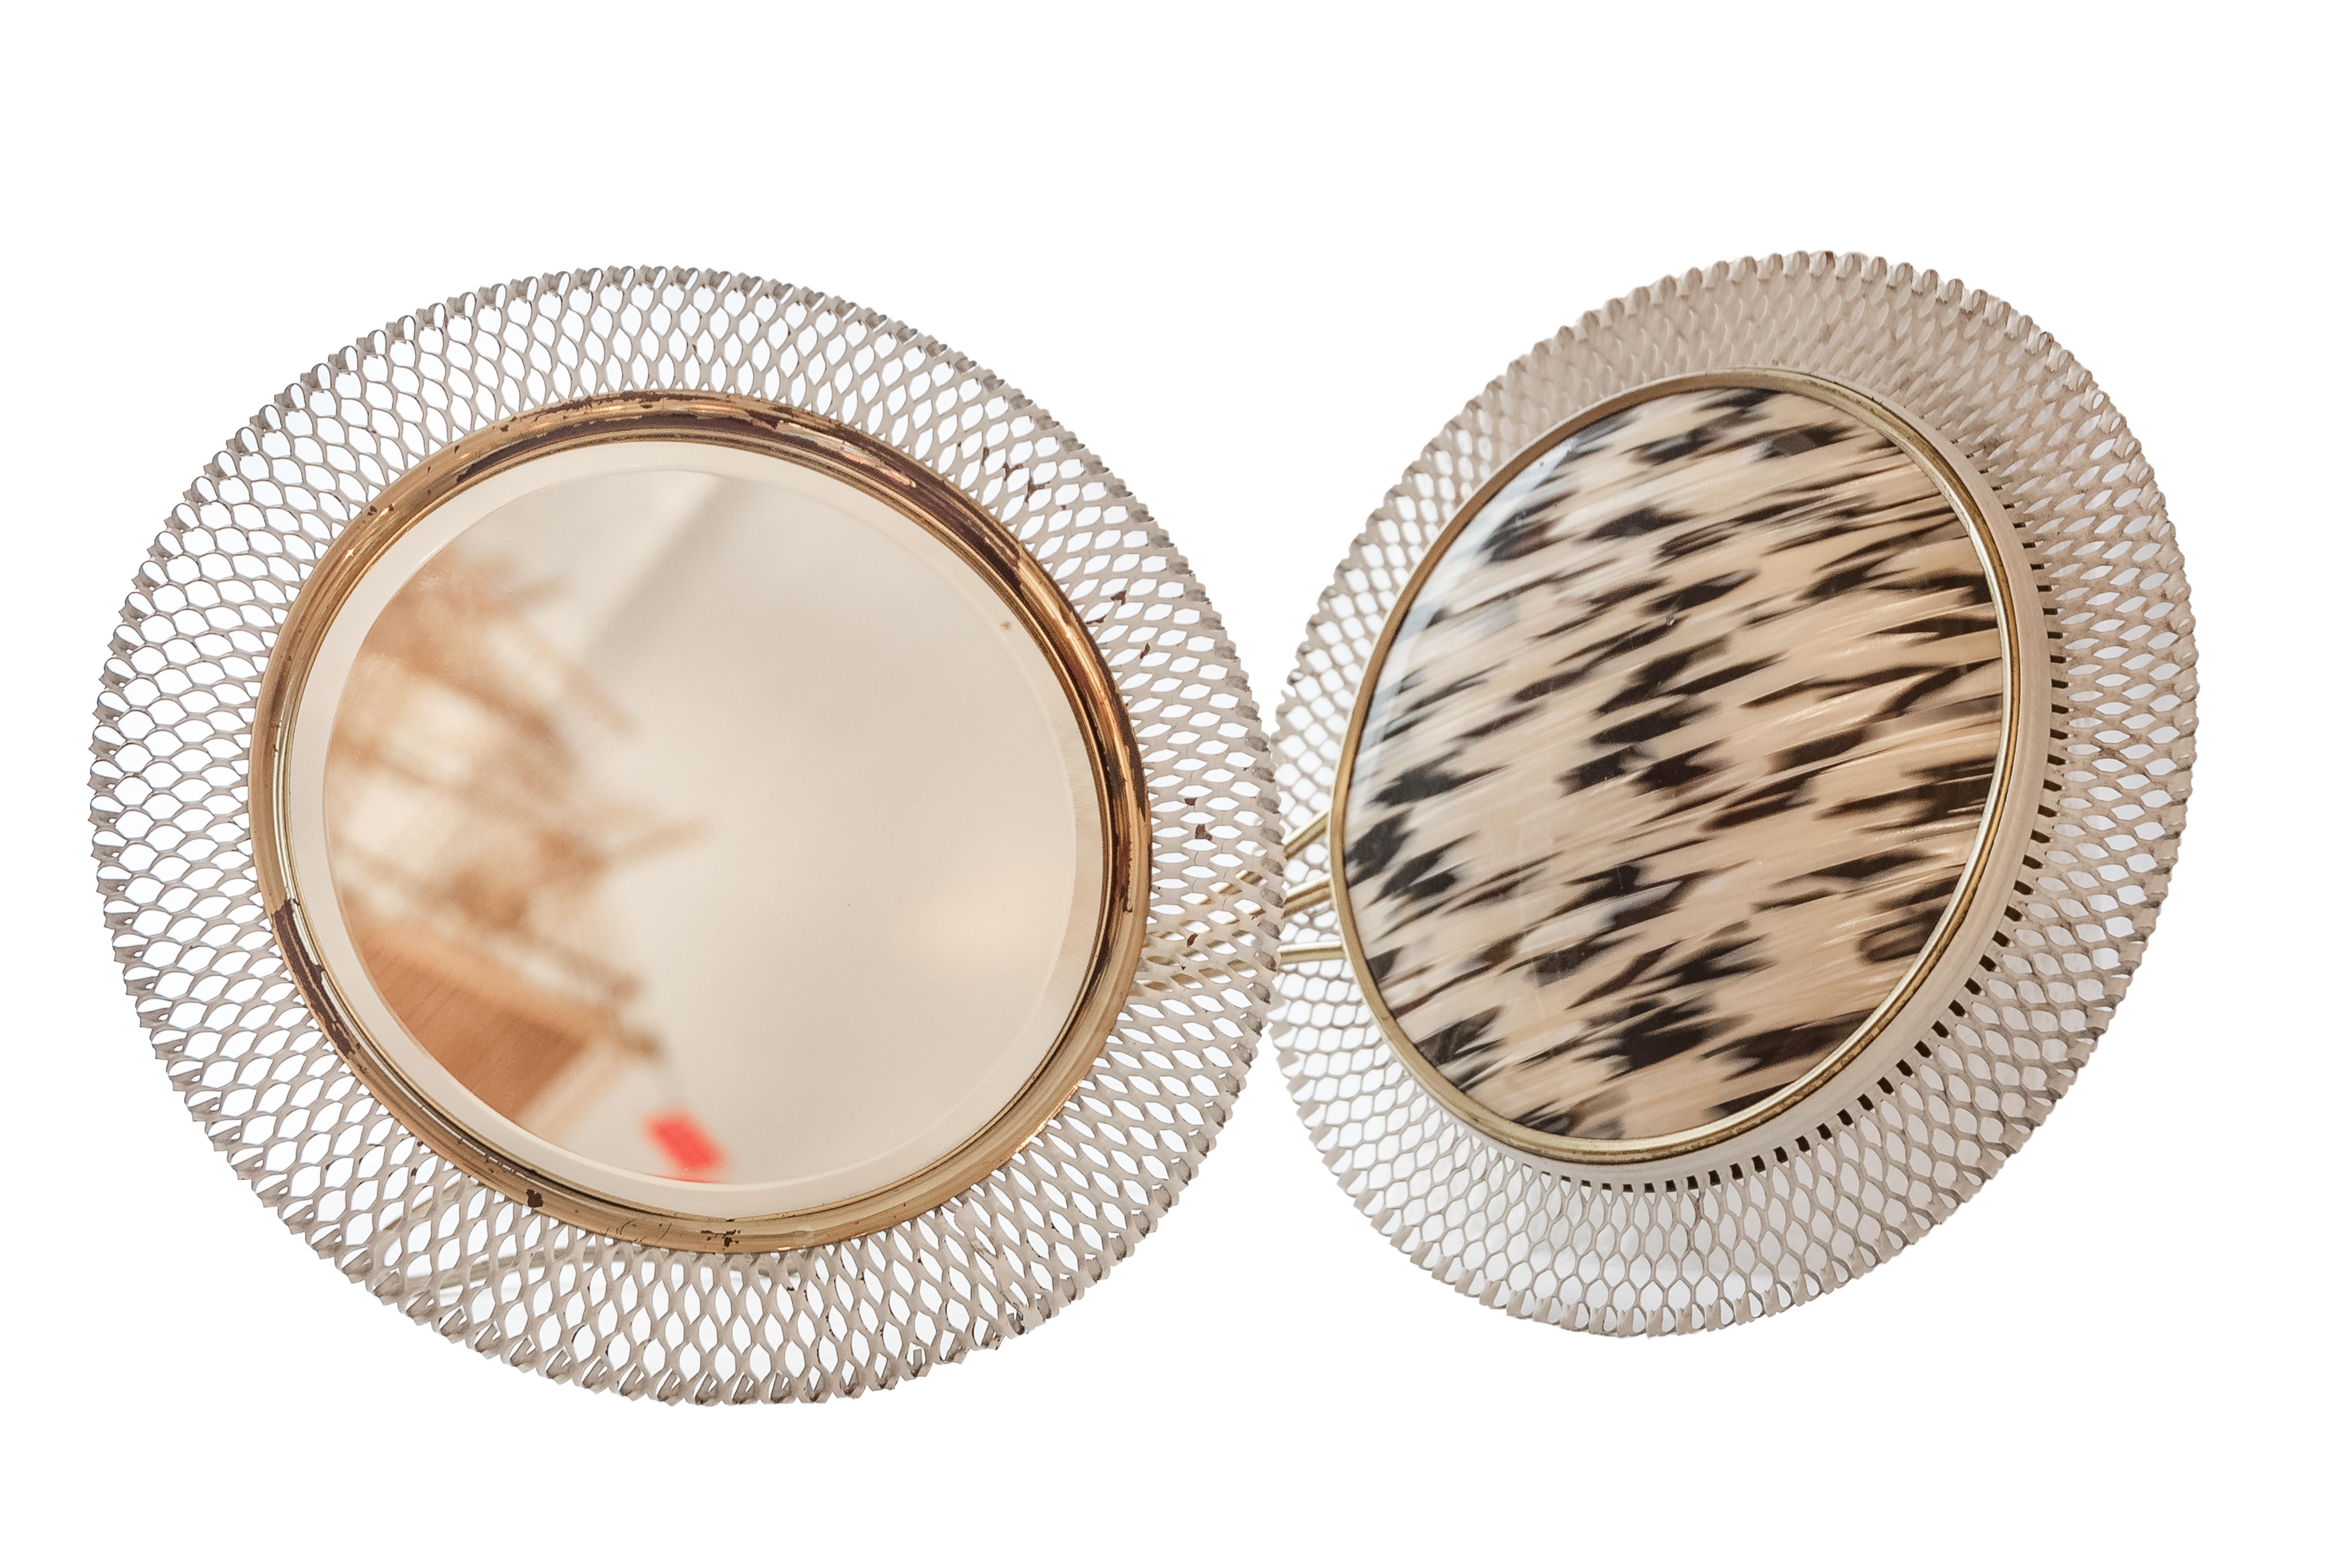 Mid-century Mathieu Matégot metal and Acrylic Mother Pearl Vanity Mirrors, 1950.

Superb Mid-Century Modern French vanity mirrors with brass and perforated metal mesh frame. Sttylish Mathieu Matégot, France circa 1950s. Excellent original condition,